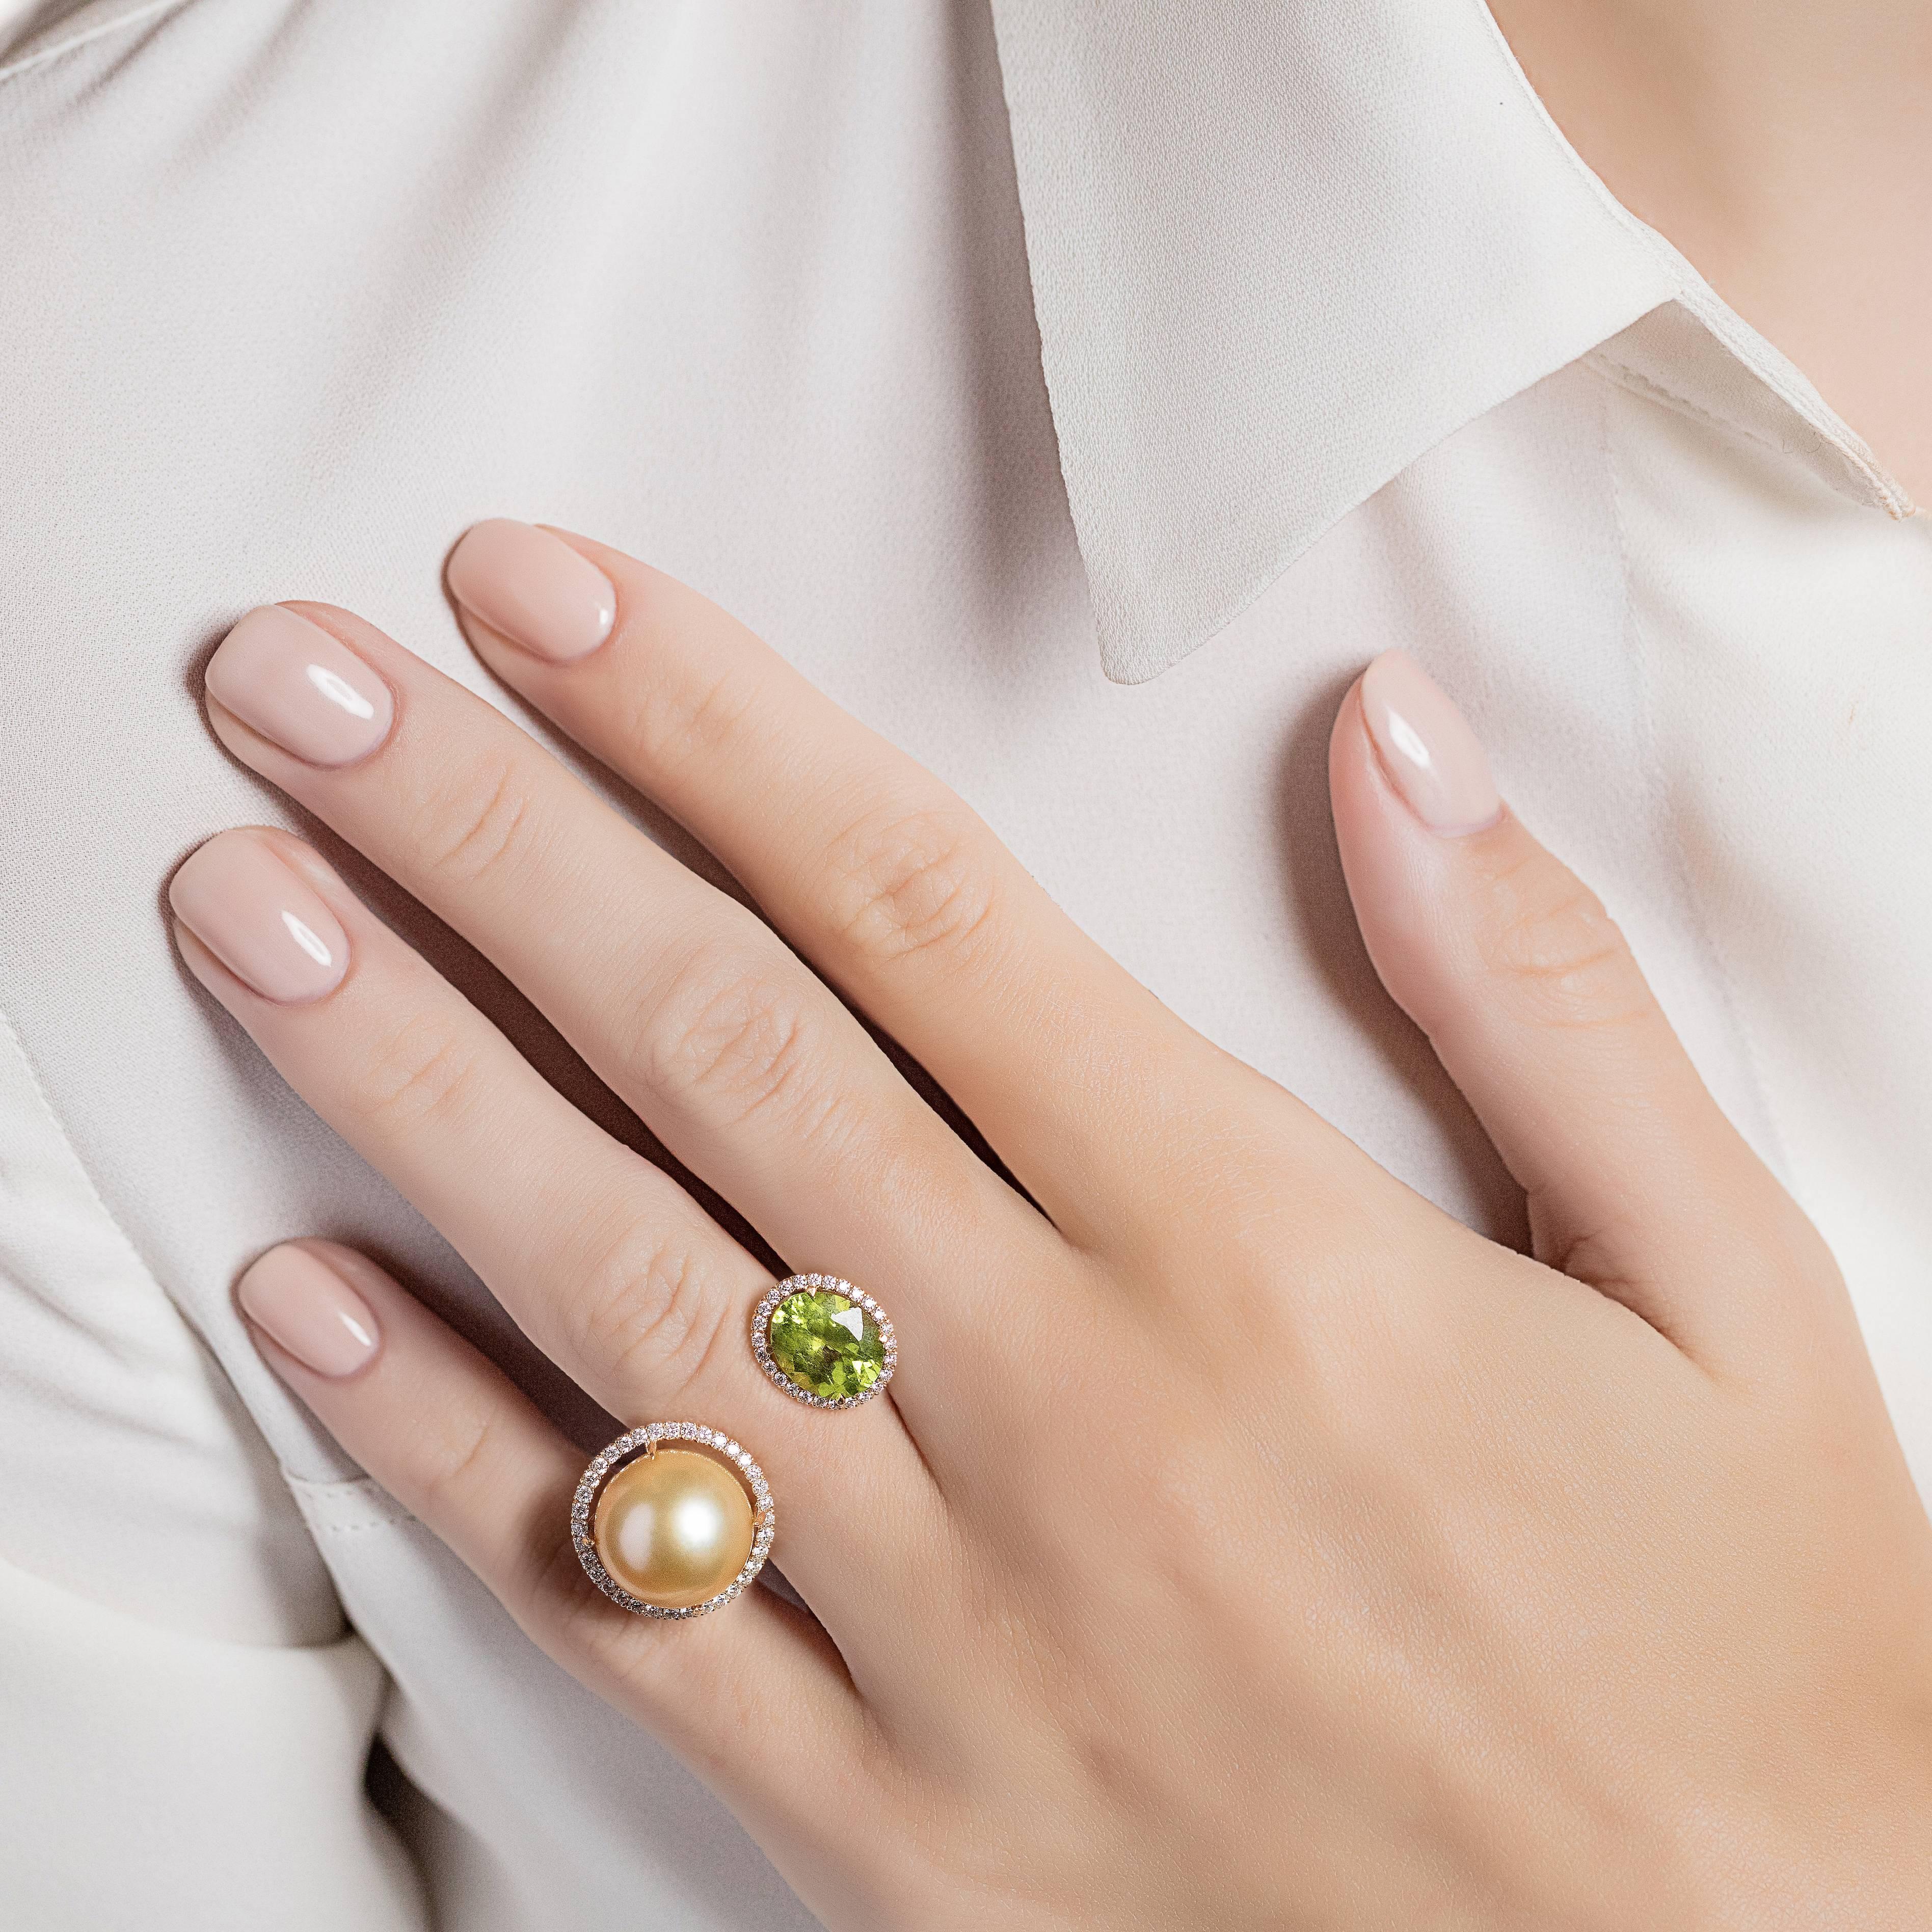 A beautiful and eye-catching between the finger ring made from 18K yellow gold with green peridot and yellow south sea pearl, each surrounded with diamonds. From the Elle et Lui collection, which symbolises the interaction of extremes – men and